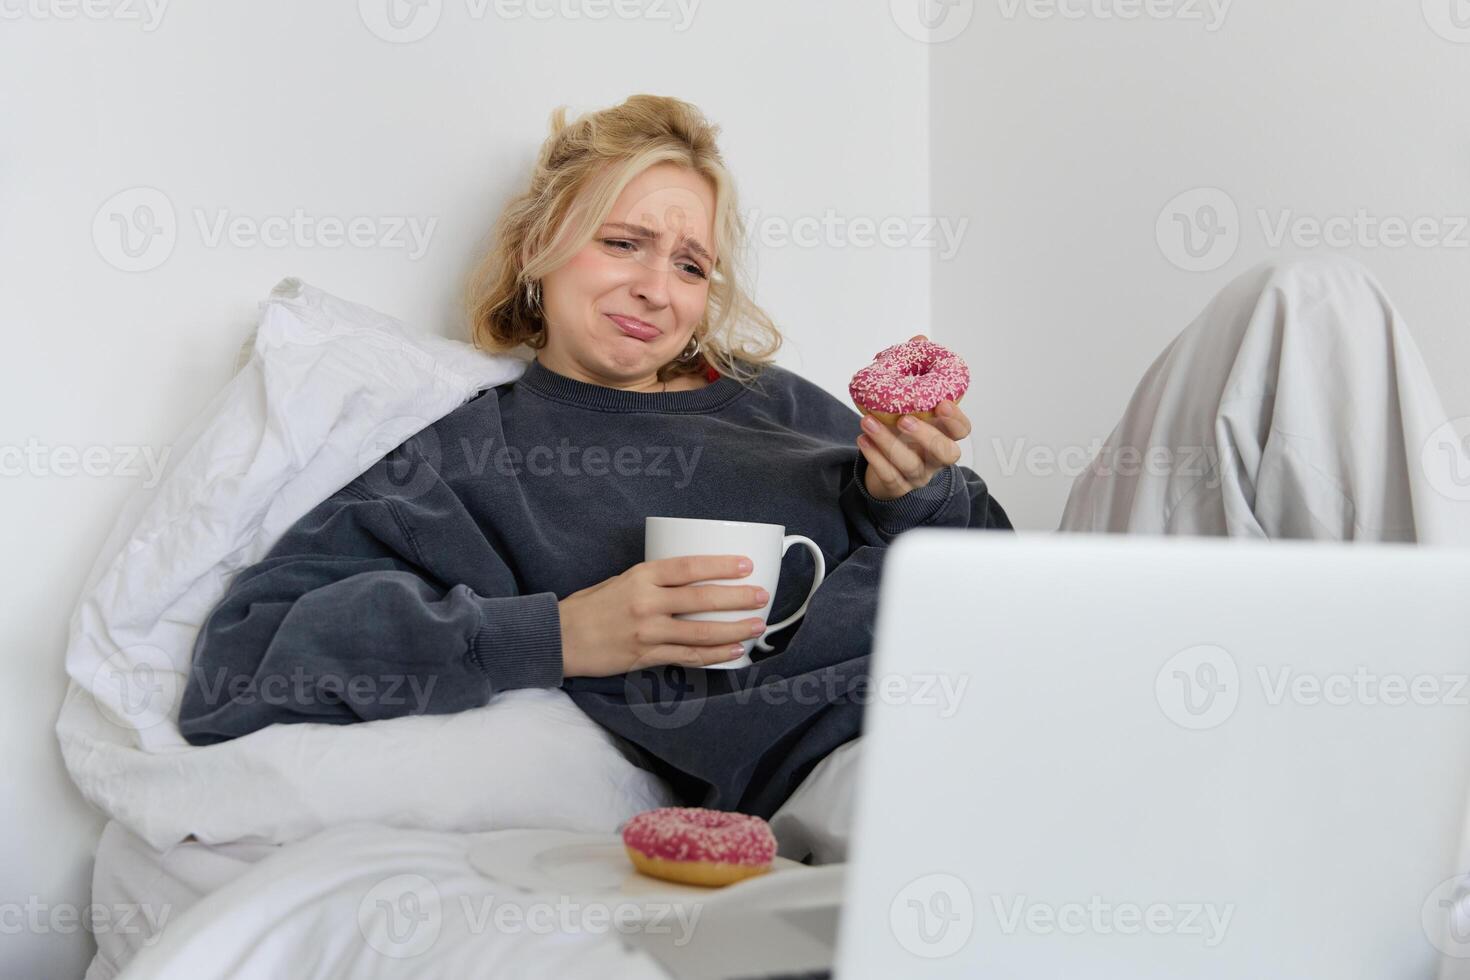 Portrait of sad, crying young woman, staying at home, sitting in bed with doughnut and comfort food, looking at something upsetting on laptop screen photo